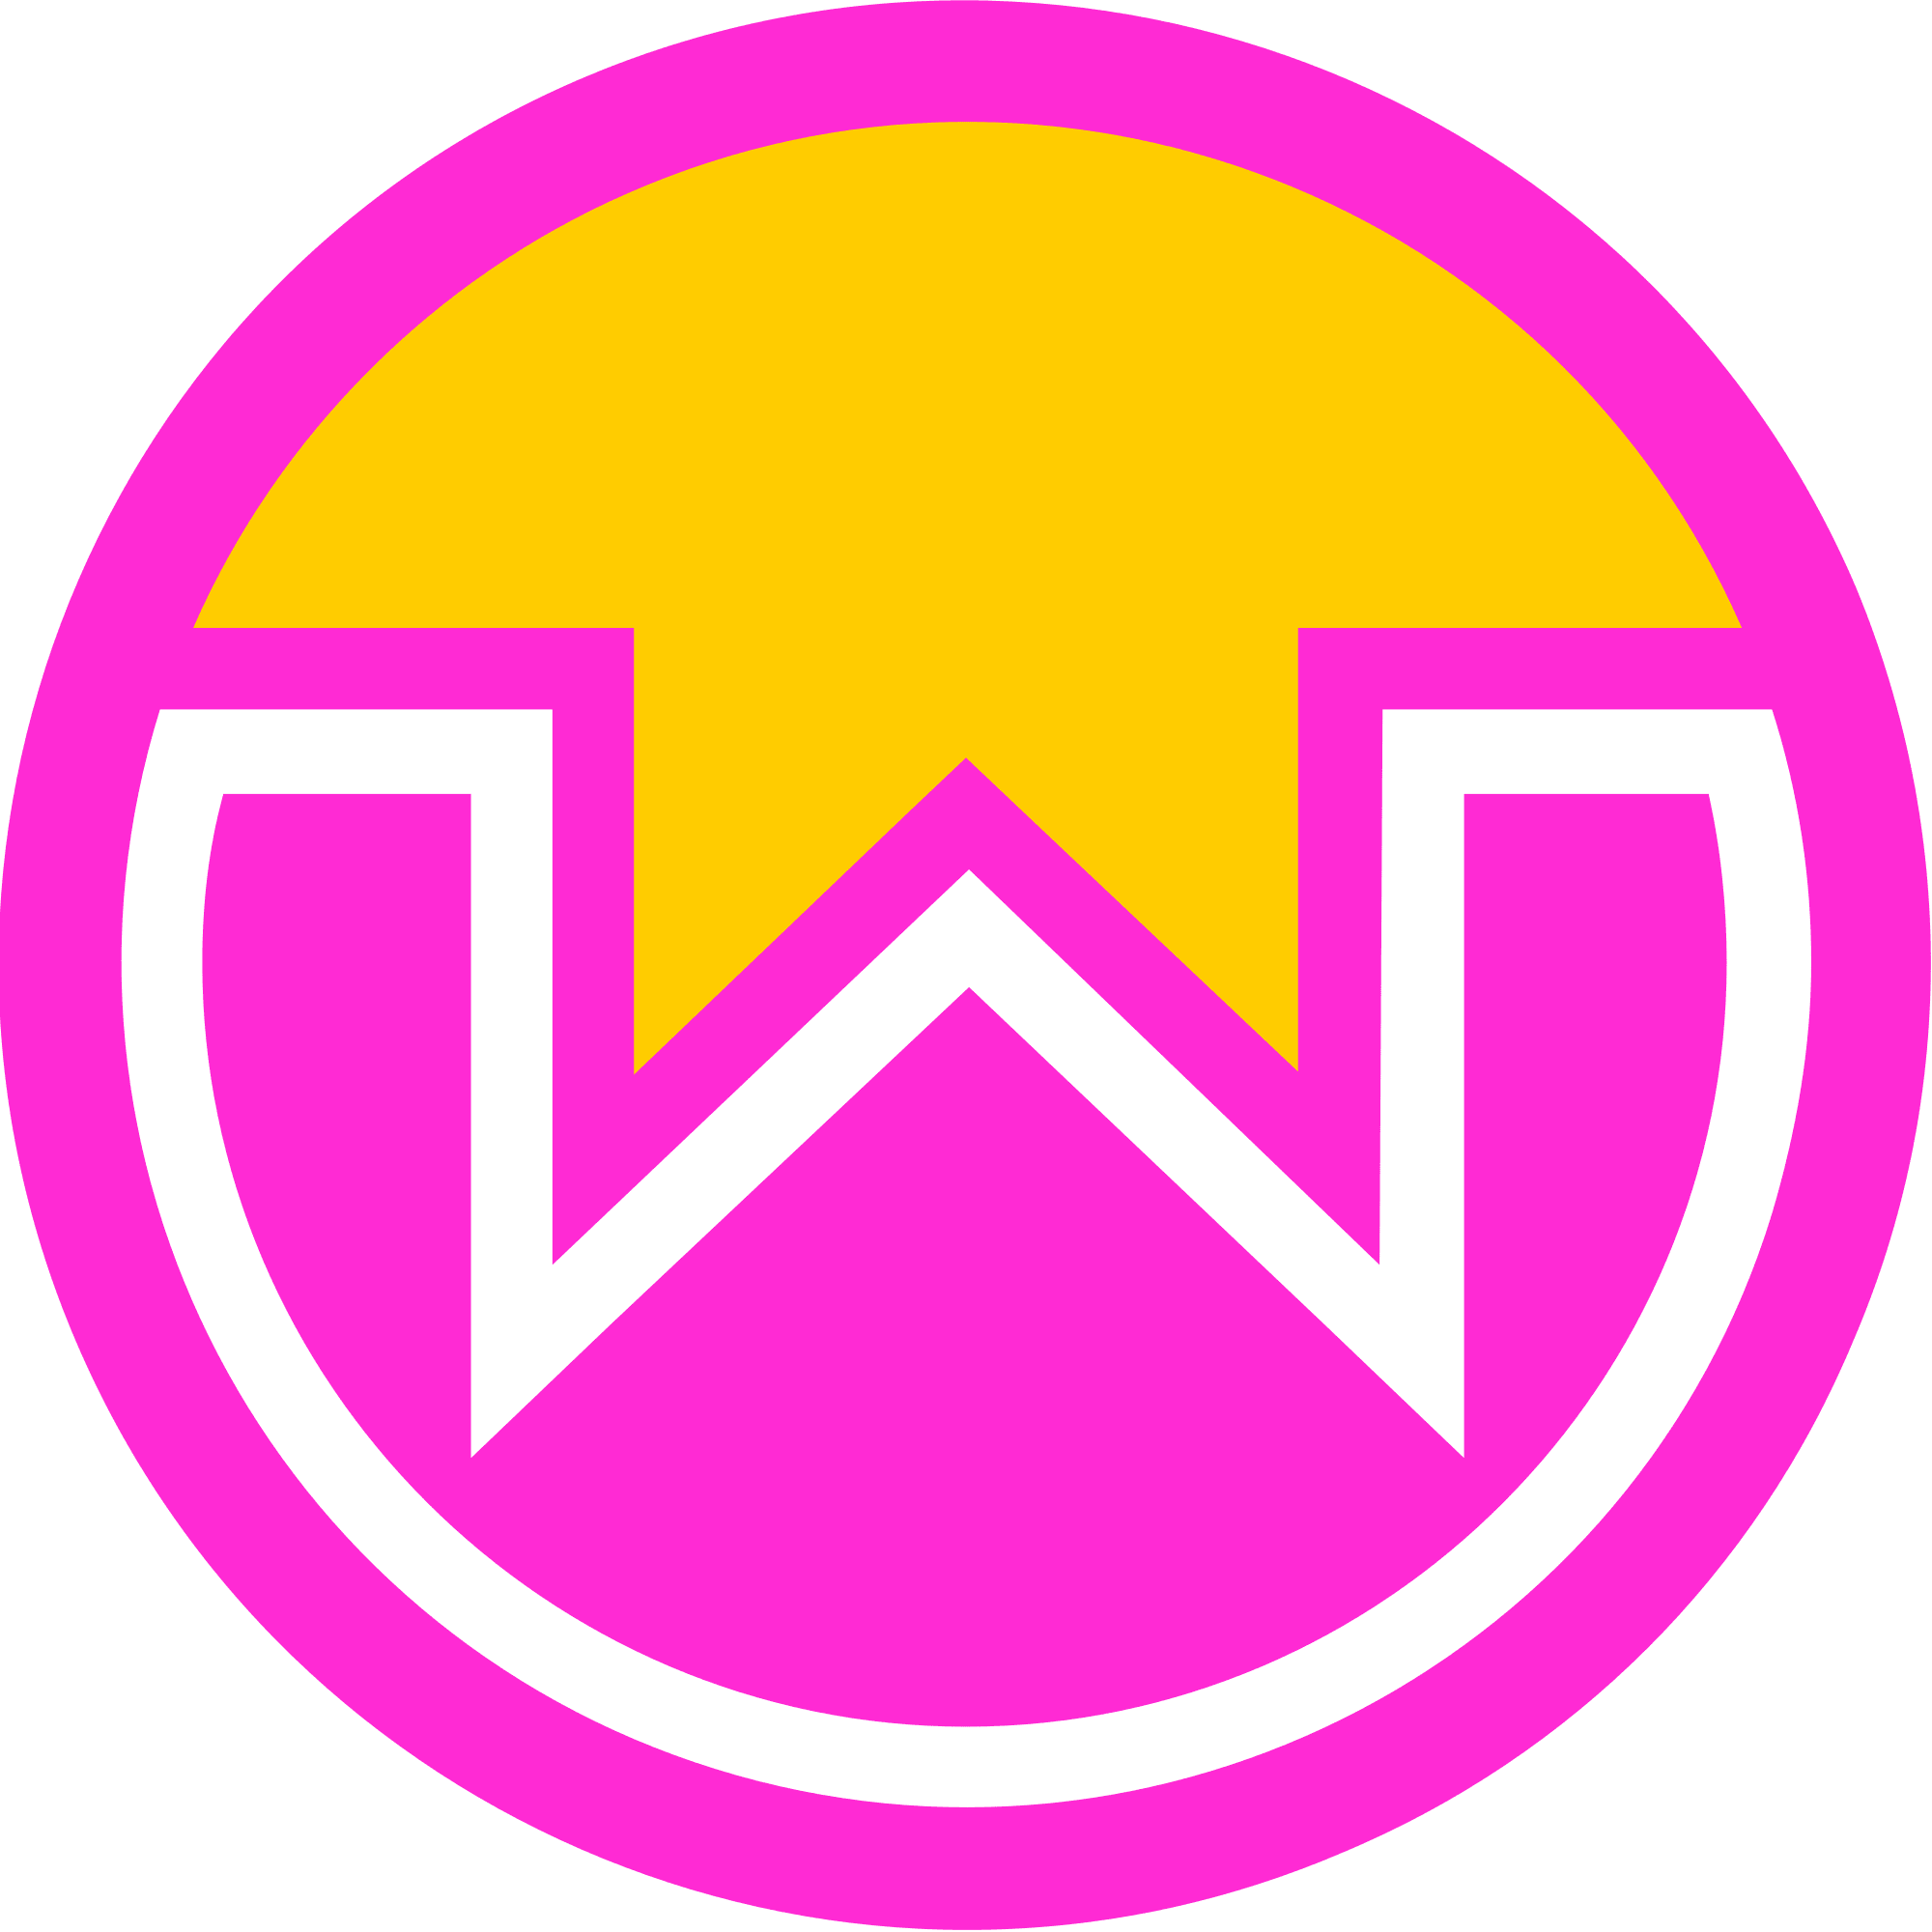 Wownero logo in png format